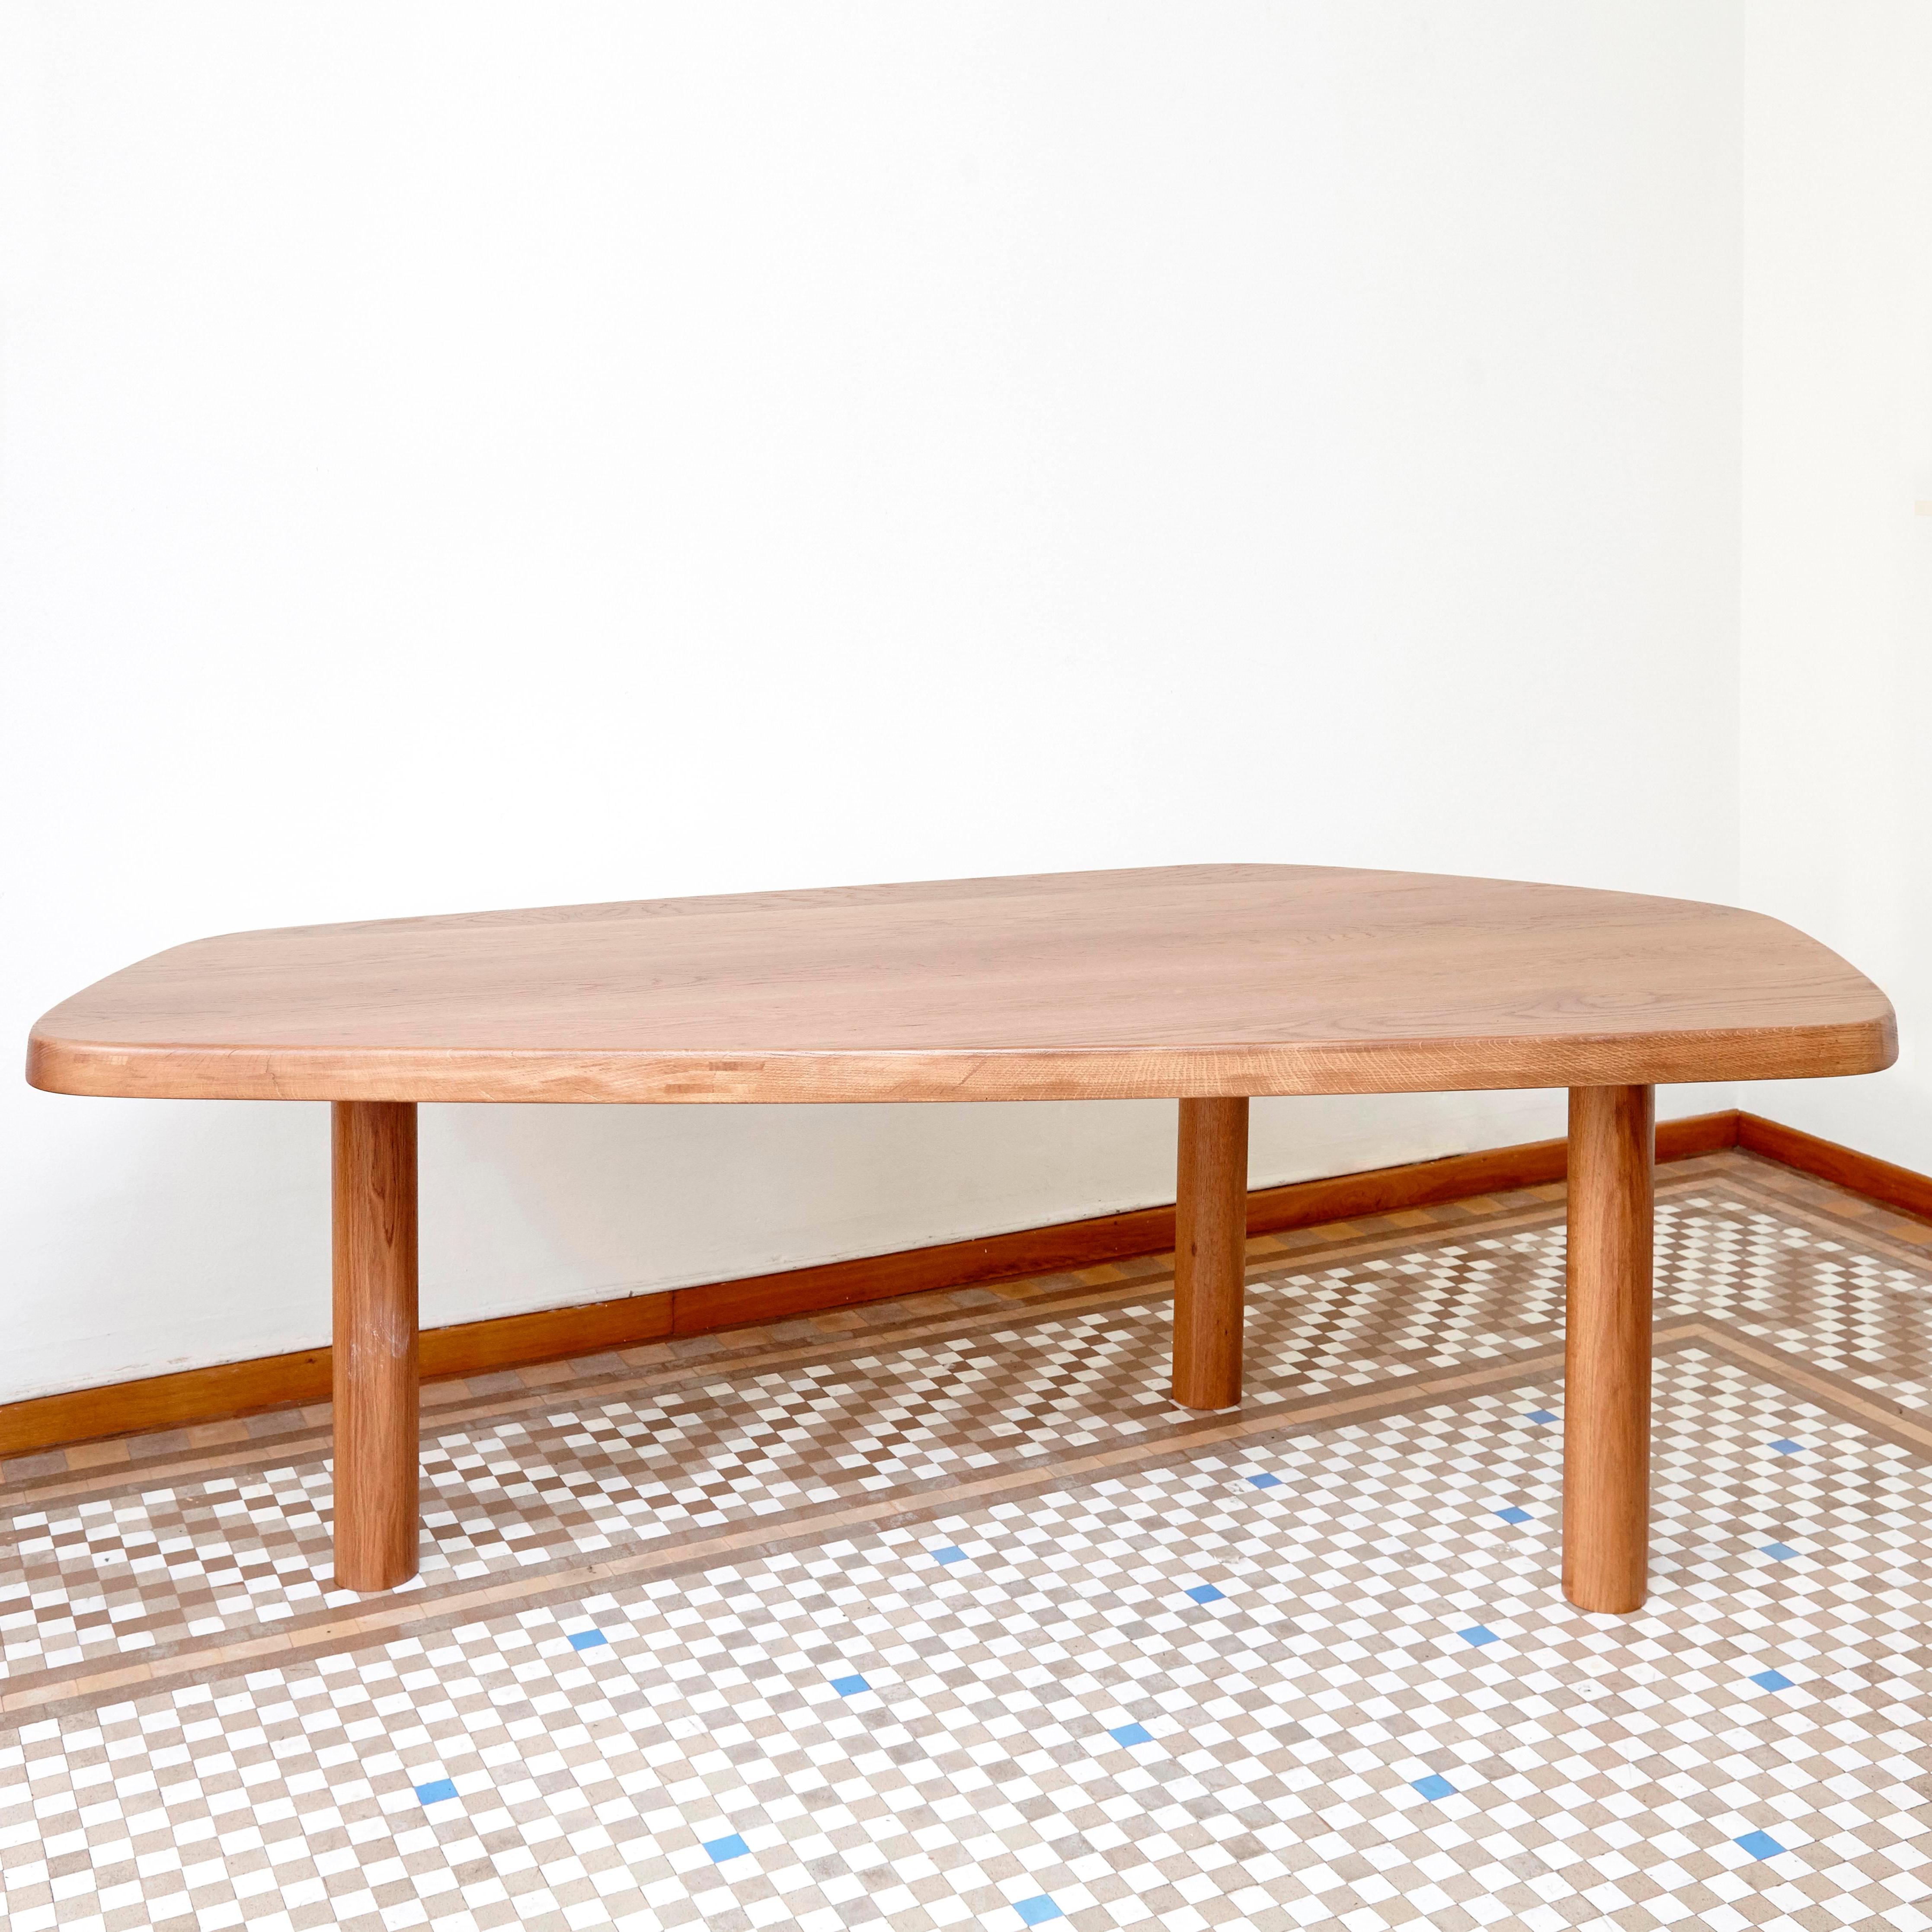 Spanish Dada Est. Contemporary, Oak Free-Form Dining Large Table